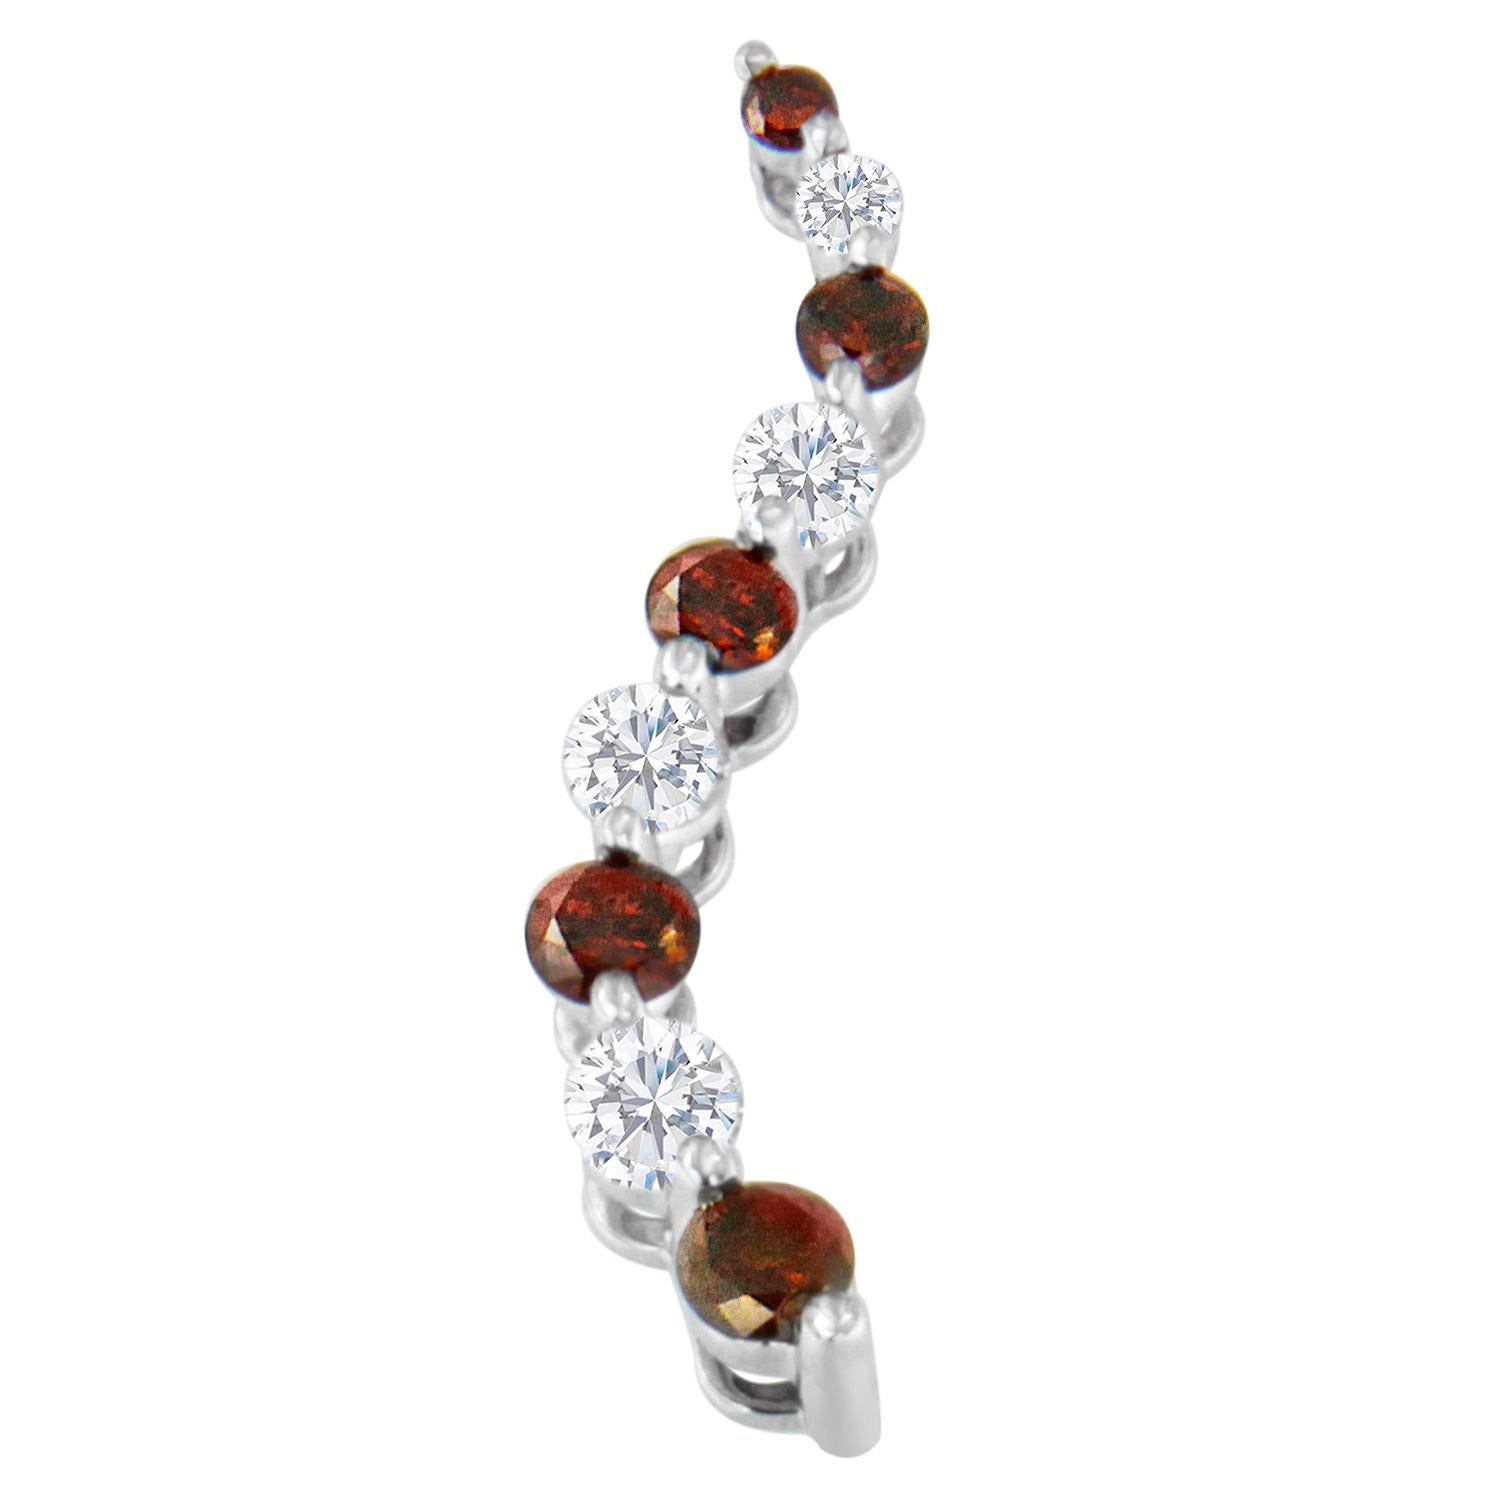 A cascading S curve of 14k white gold showcases round-cut red and white diamonds in this coveted pendant. Each stone is carefully prong set to catch the light for maximum sparkle. Ships with size 18 chain secured with a spring ring clasp.

'Video